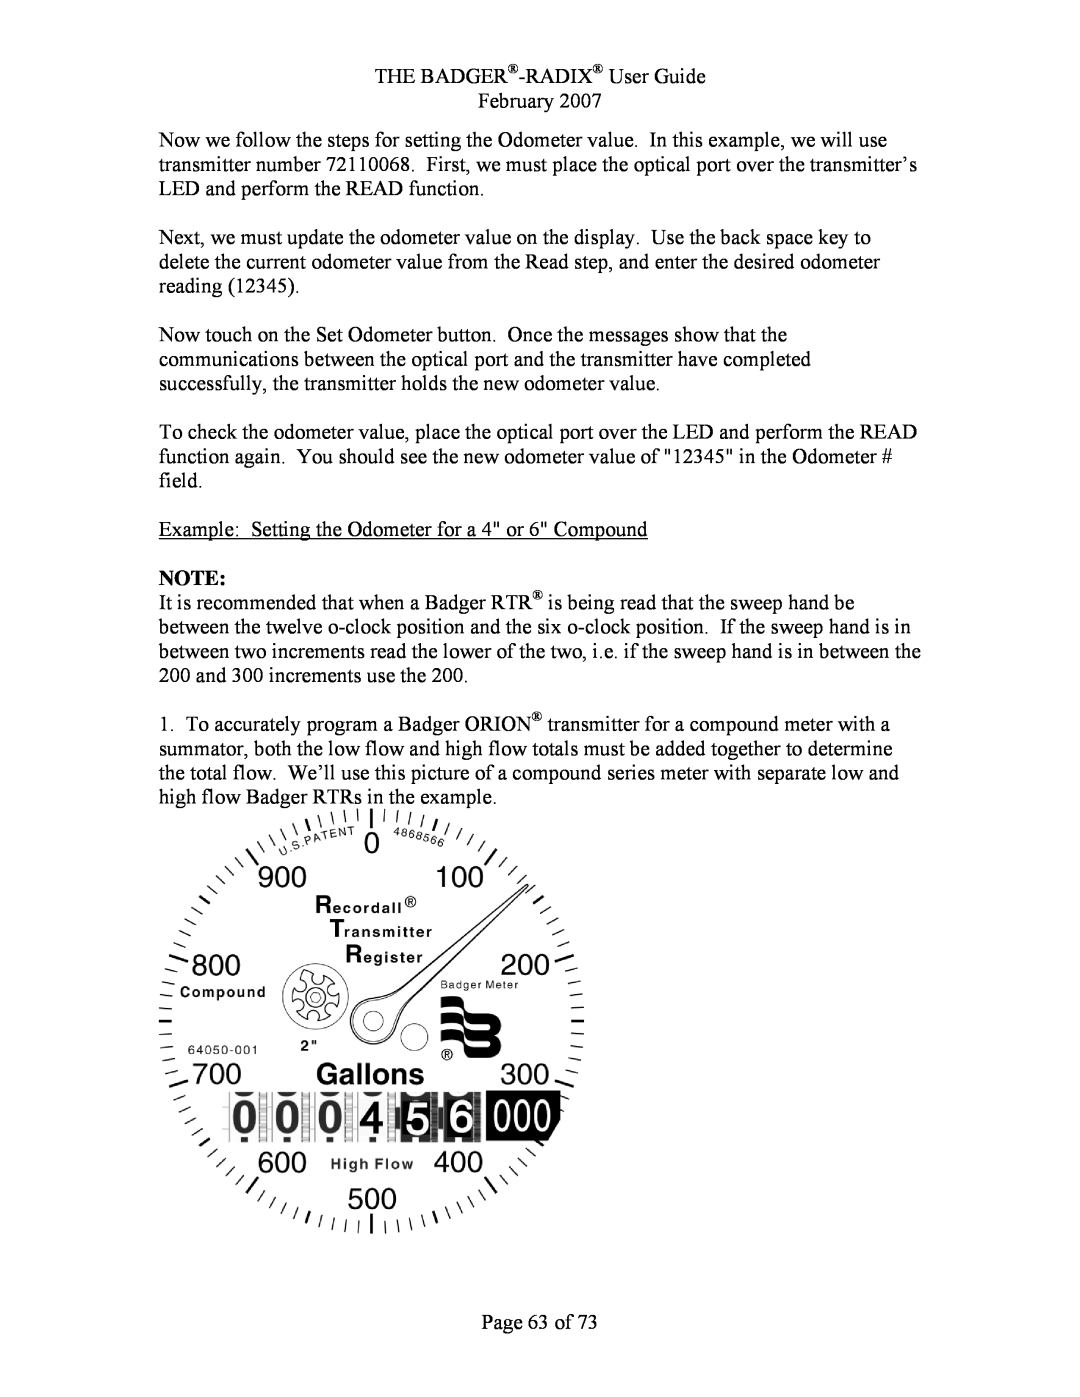 Badger Basket N64944-001, RAD-IOM-01 operation manual Example Setting the Odometer for a 4 or 6 Compound, Page 63 of 